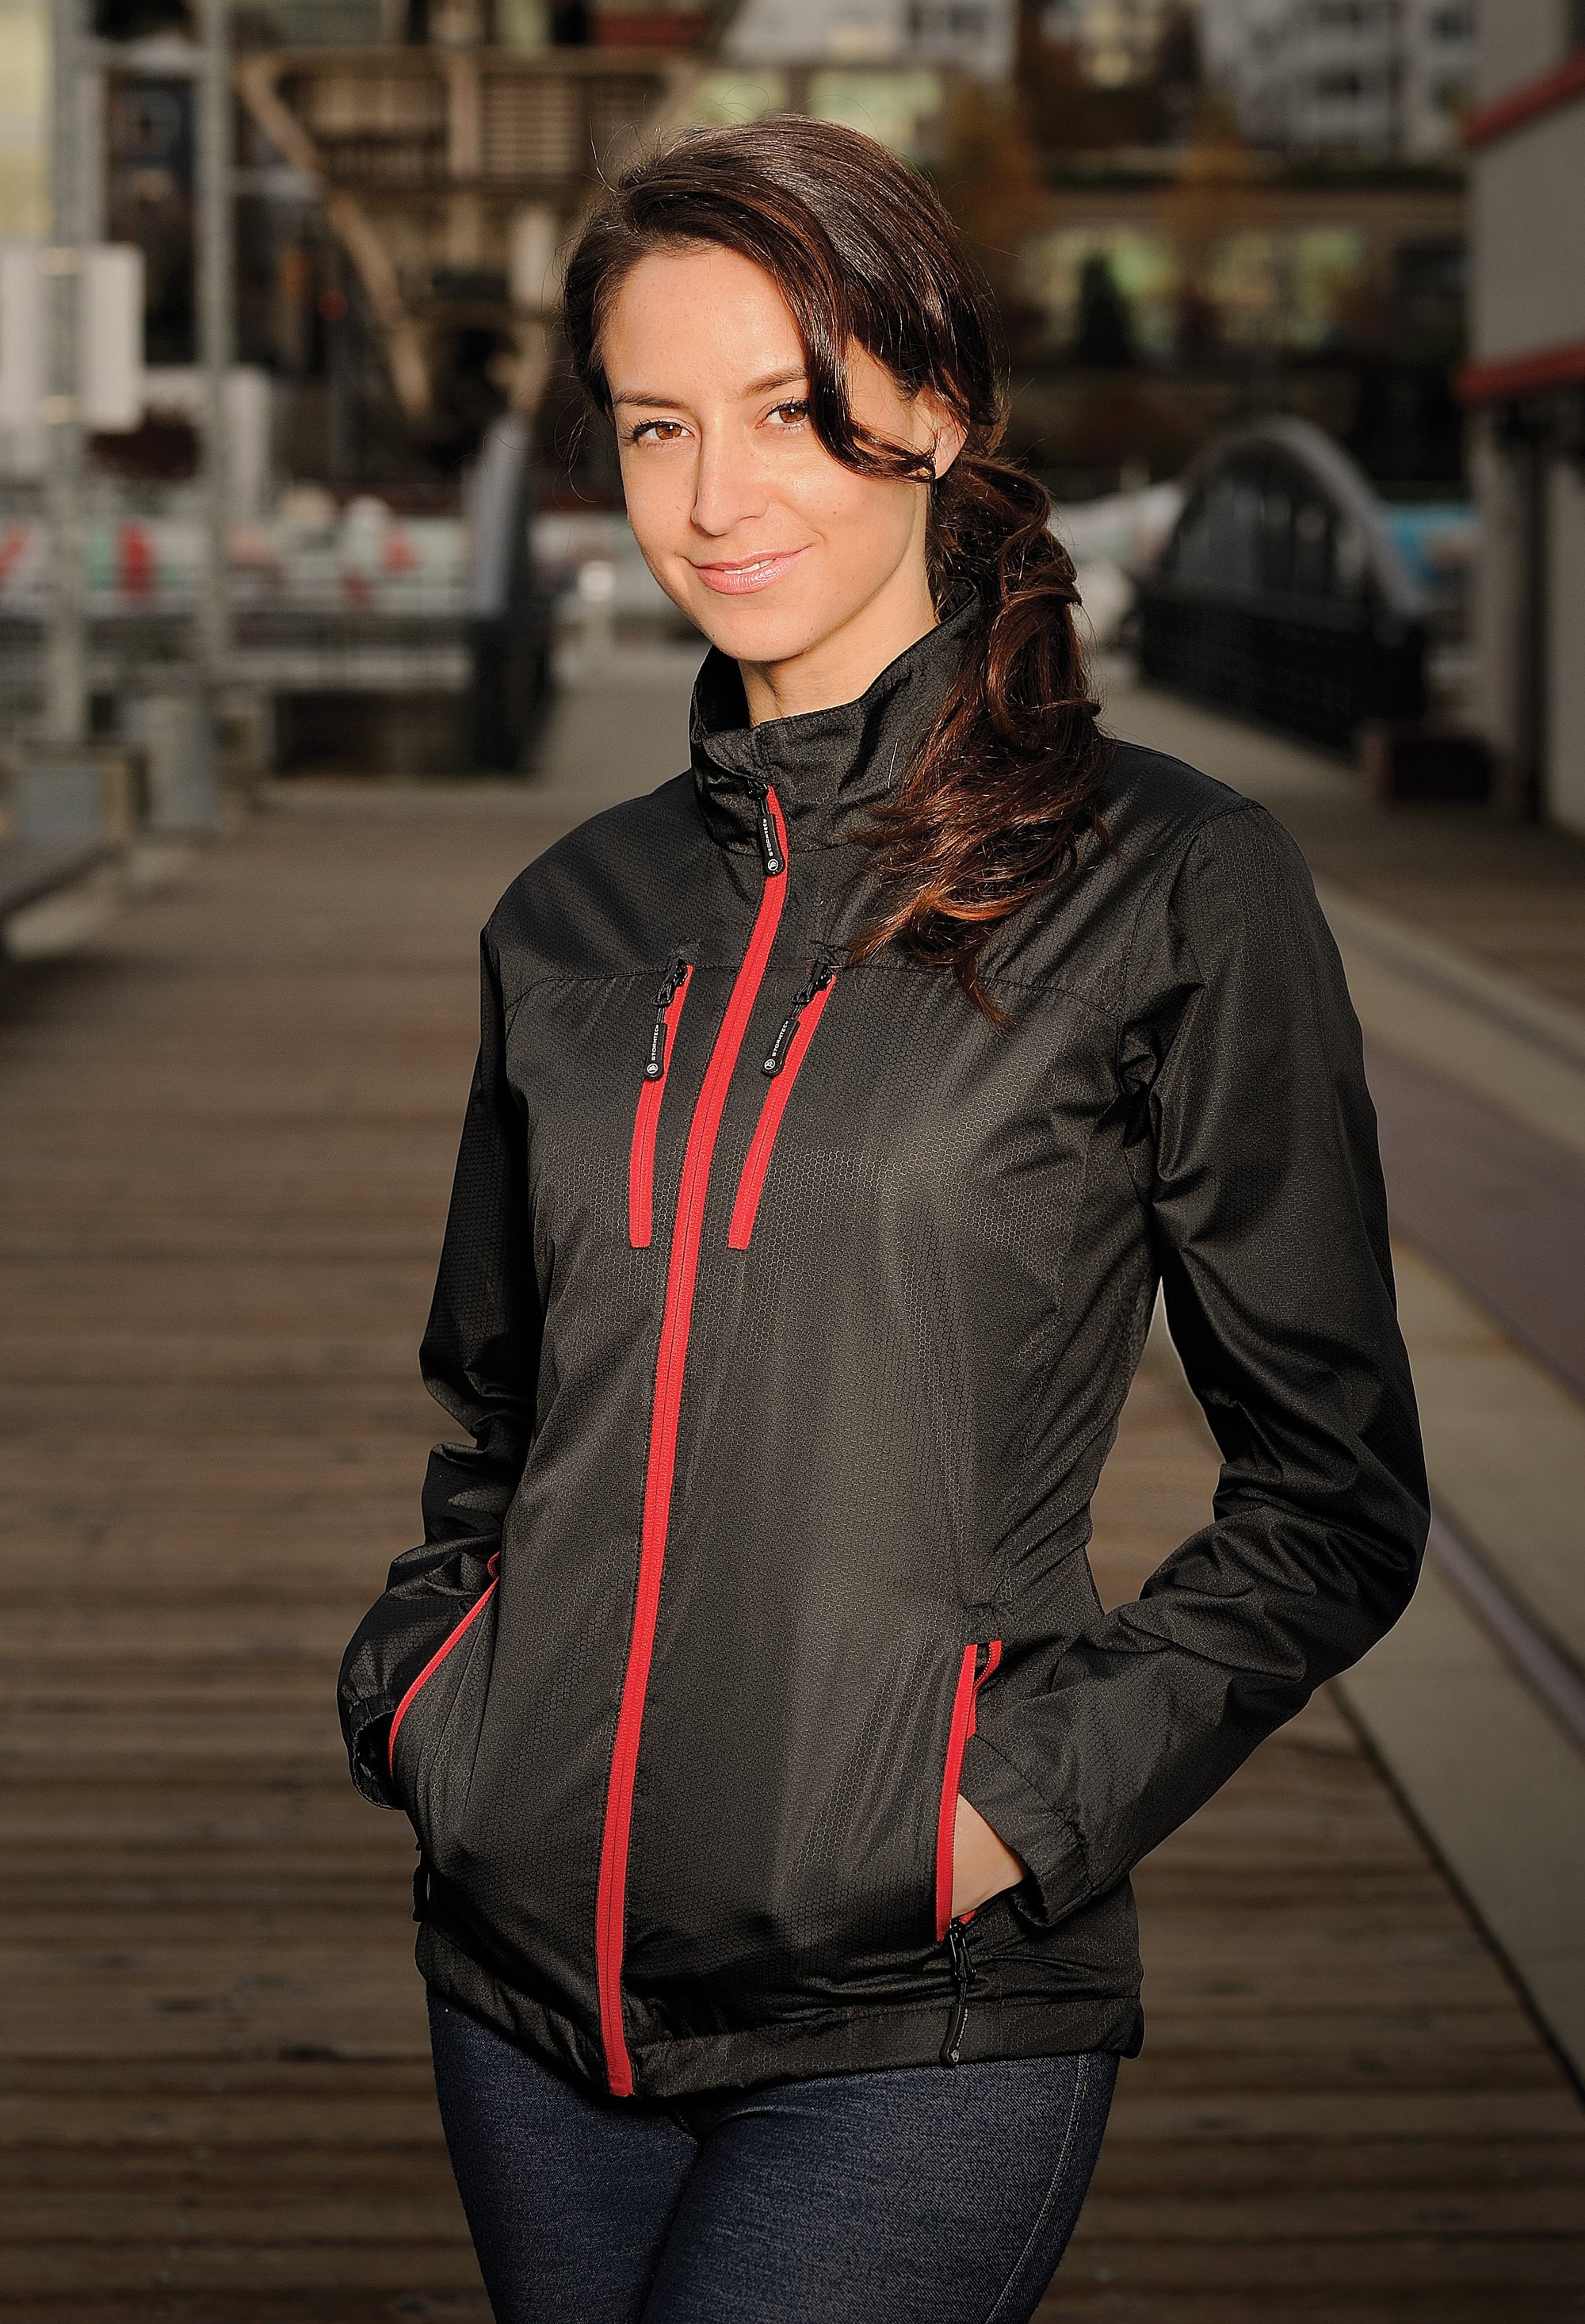 STORMTECH LADIES MISTRAL SHELL JACKET